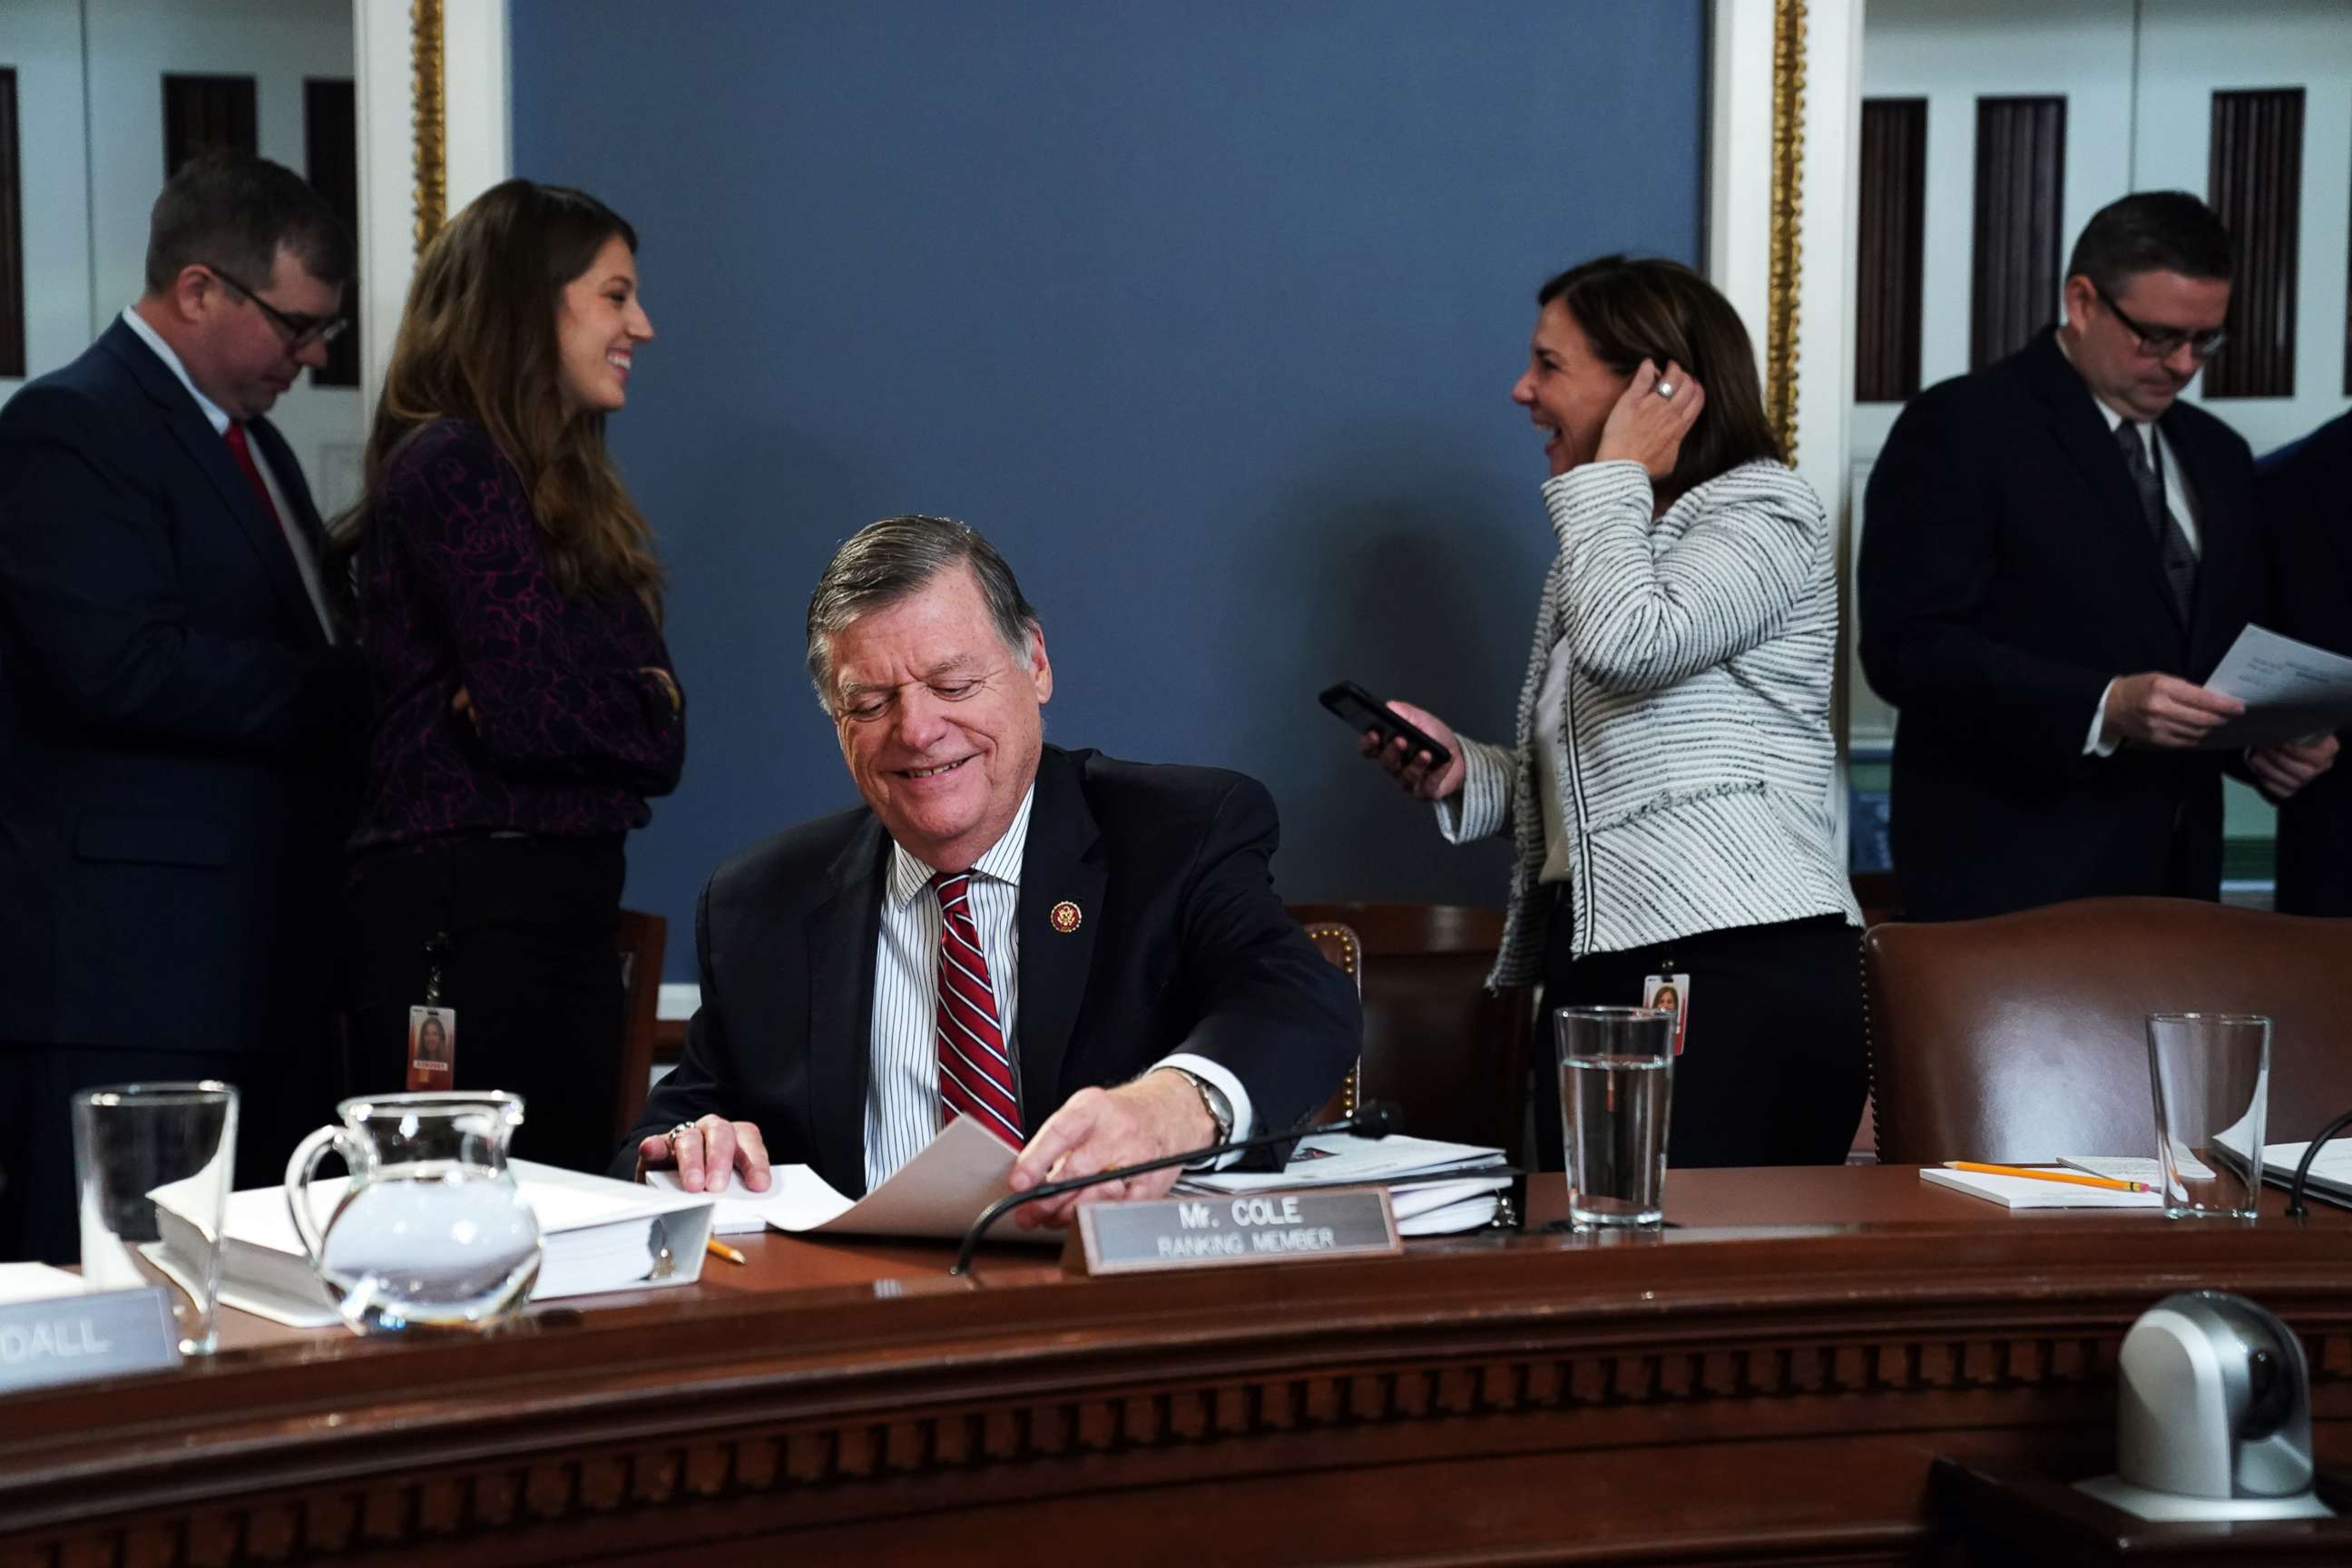 PHOTO: Representative Tom Cole (R-OK) before a meeting of the house committee on rules to consider H. Res. 755 Impeaching Donald John Trump, President of the United States, for high crimes and misdemeanors on Capitol Hill, Dec. 17, 2019. 